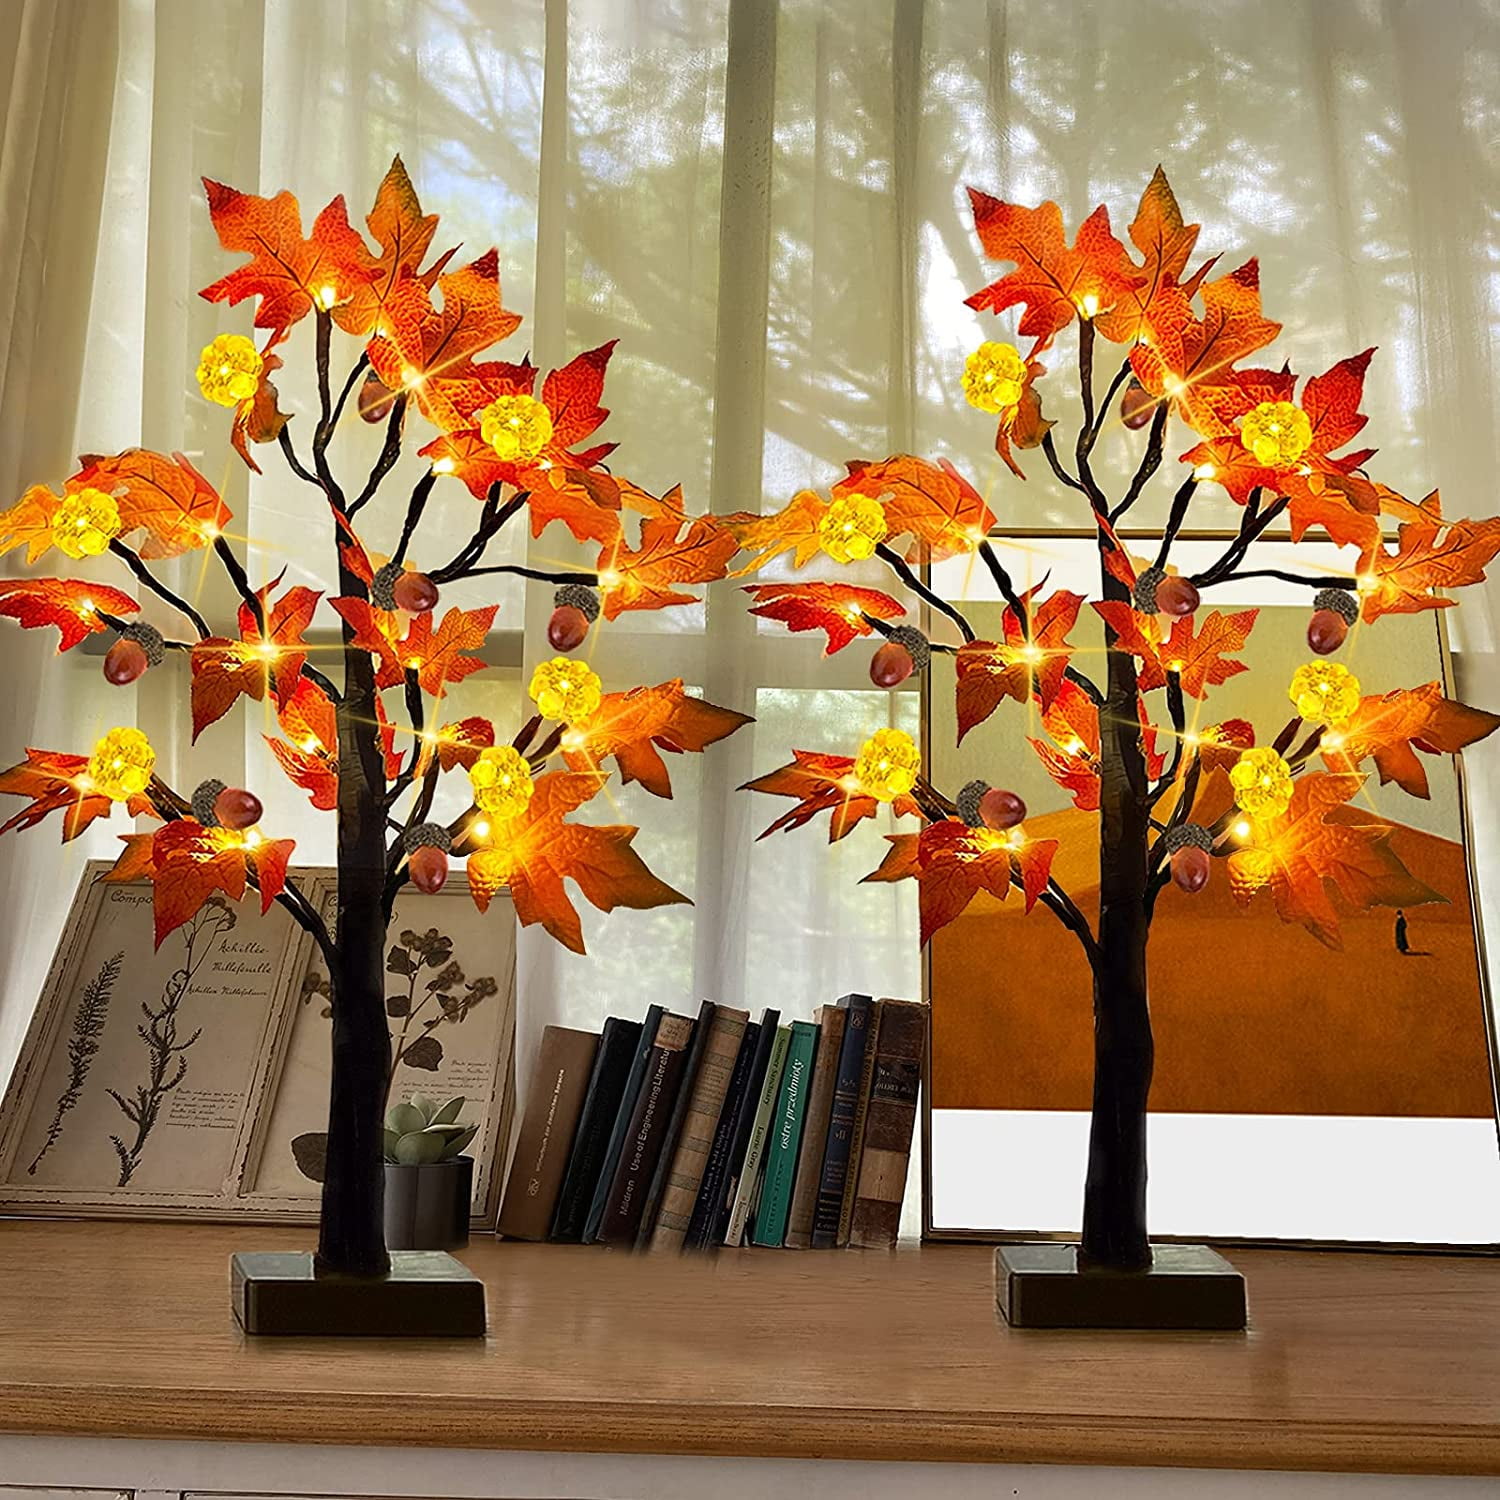 24 LED Light Up Fall Tree Tabletop Lighted Maple Tree Battery Operated Thanksgiving Table Decoration Lights Maple Leaves Pumpkin Thanksgiving Halloween Tree for Indoor Home Bedroom Fall Decorations